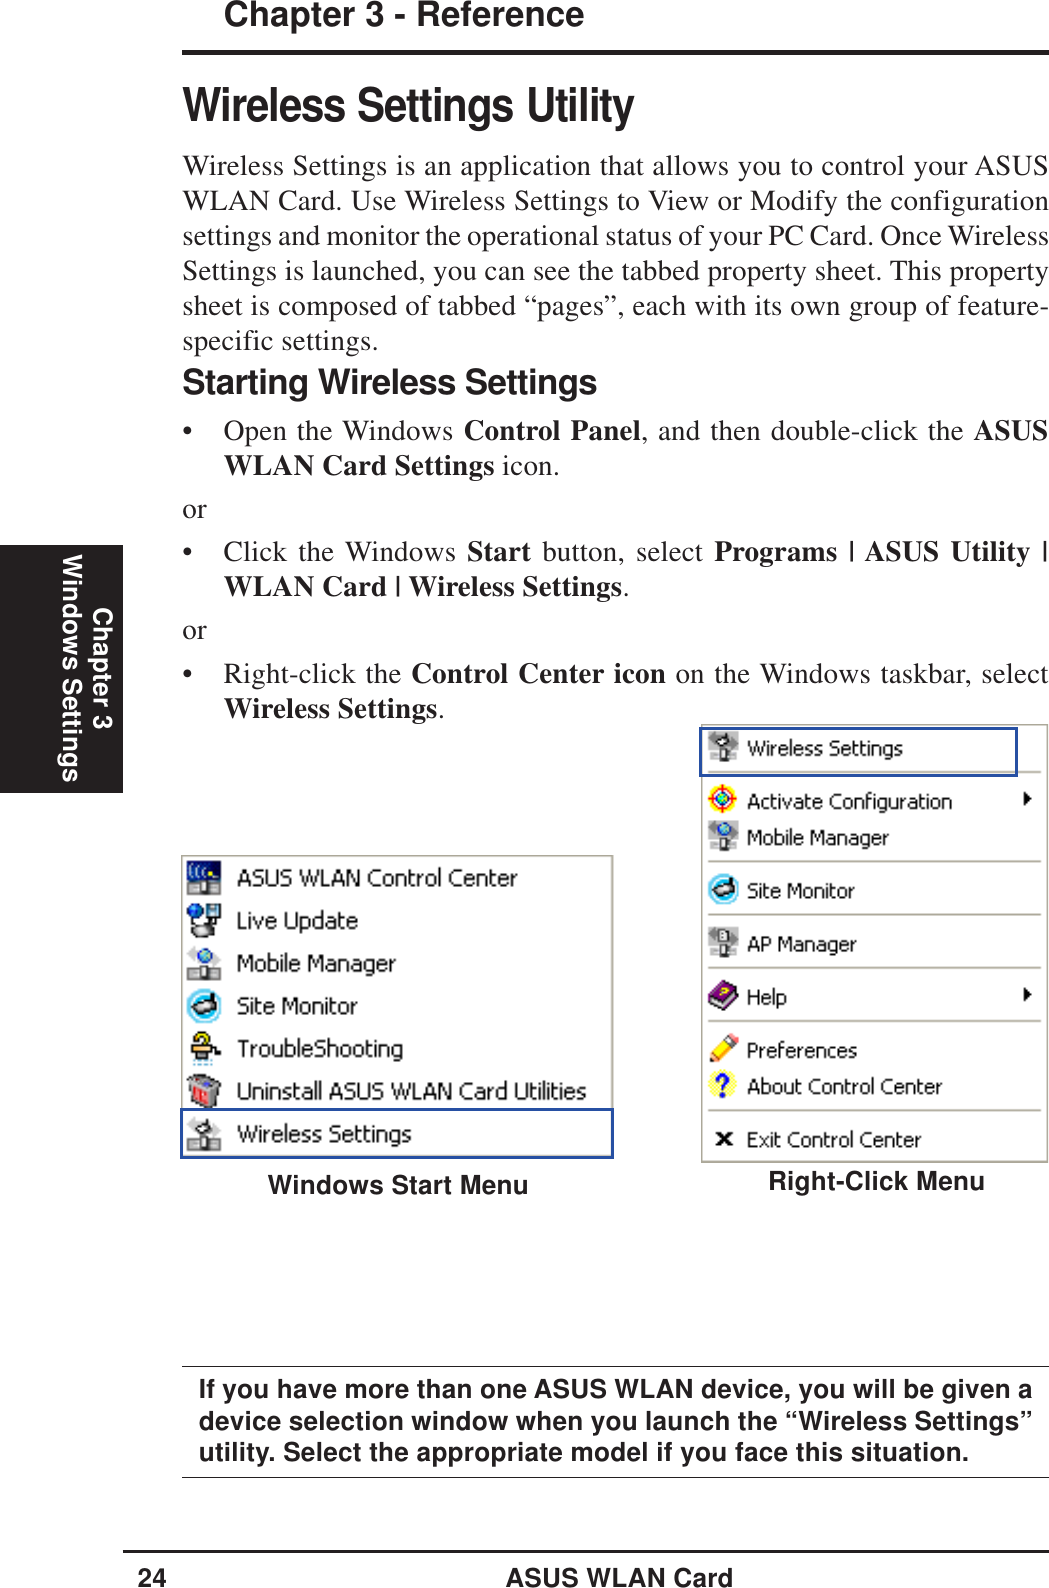 24 ASUS WLAN CardChapter 3 - ReferenceChapter 3Windows SettingsWireless Settings UtilityWireless Settings is an application that allows you to control your ASUSWLAN Card. Use Wireless Settings to View or Modify the configurationsettings and monitor the operational status of your PC Card. Once WirelessSettings is launched, you can see the tabbed property sheet. This propertysheet is composed of tabbed “pages”, each with its own group of feature-specific settings.Right-Click MenuIf you have more than one ASUS WLAN device, you will be given adevice selection window when you launch the “Wireless Settings”utility. Select the appropriate model if you face this situation.Starting Wireless Settings• Open the Windows Control Panel, and then double-click the ASUSWLAN Card Settings icon.or• Click the Windows Start button, select Programs | ASUS Utility |WLAN Card | Wireless Settings.or• Right-click the Control Center icon on the Windows taskbar, selectWireless Settings.Windows Start Menu